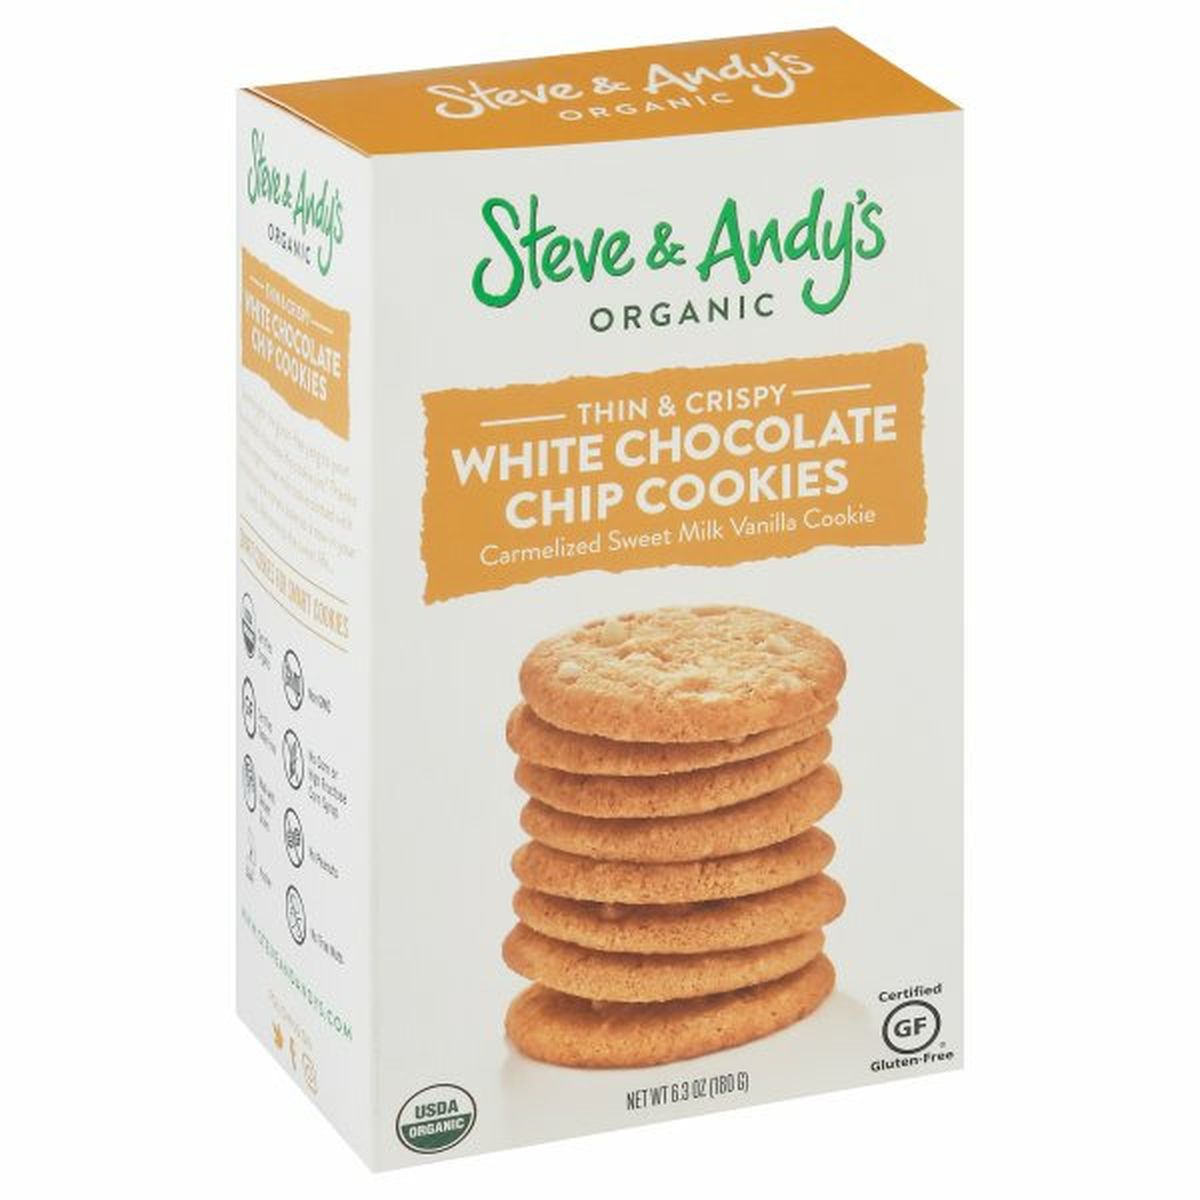 Calories in Steve & Andy's Organic Cookies, White Chocolate Chip